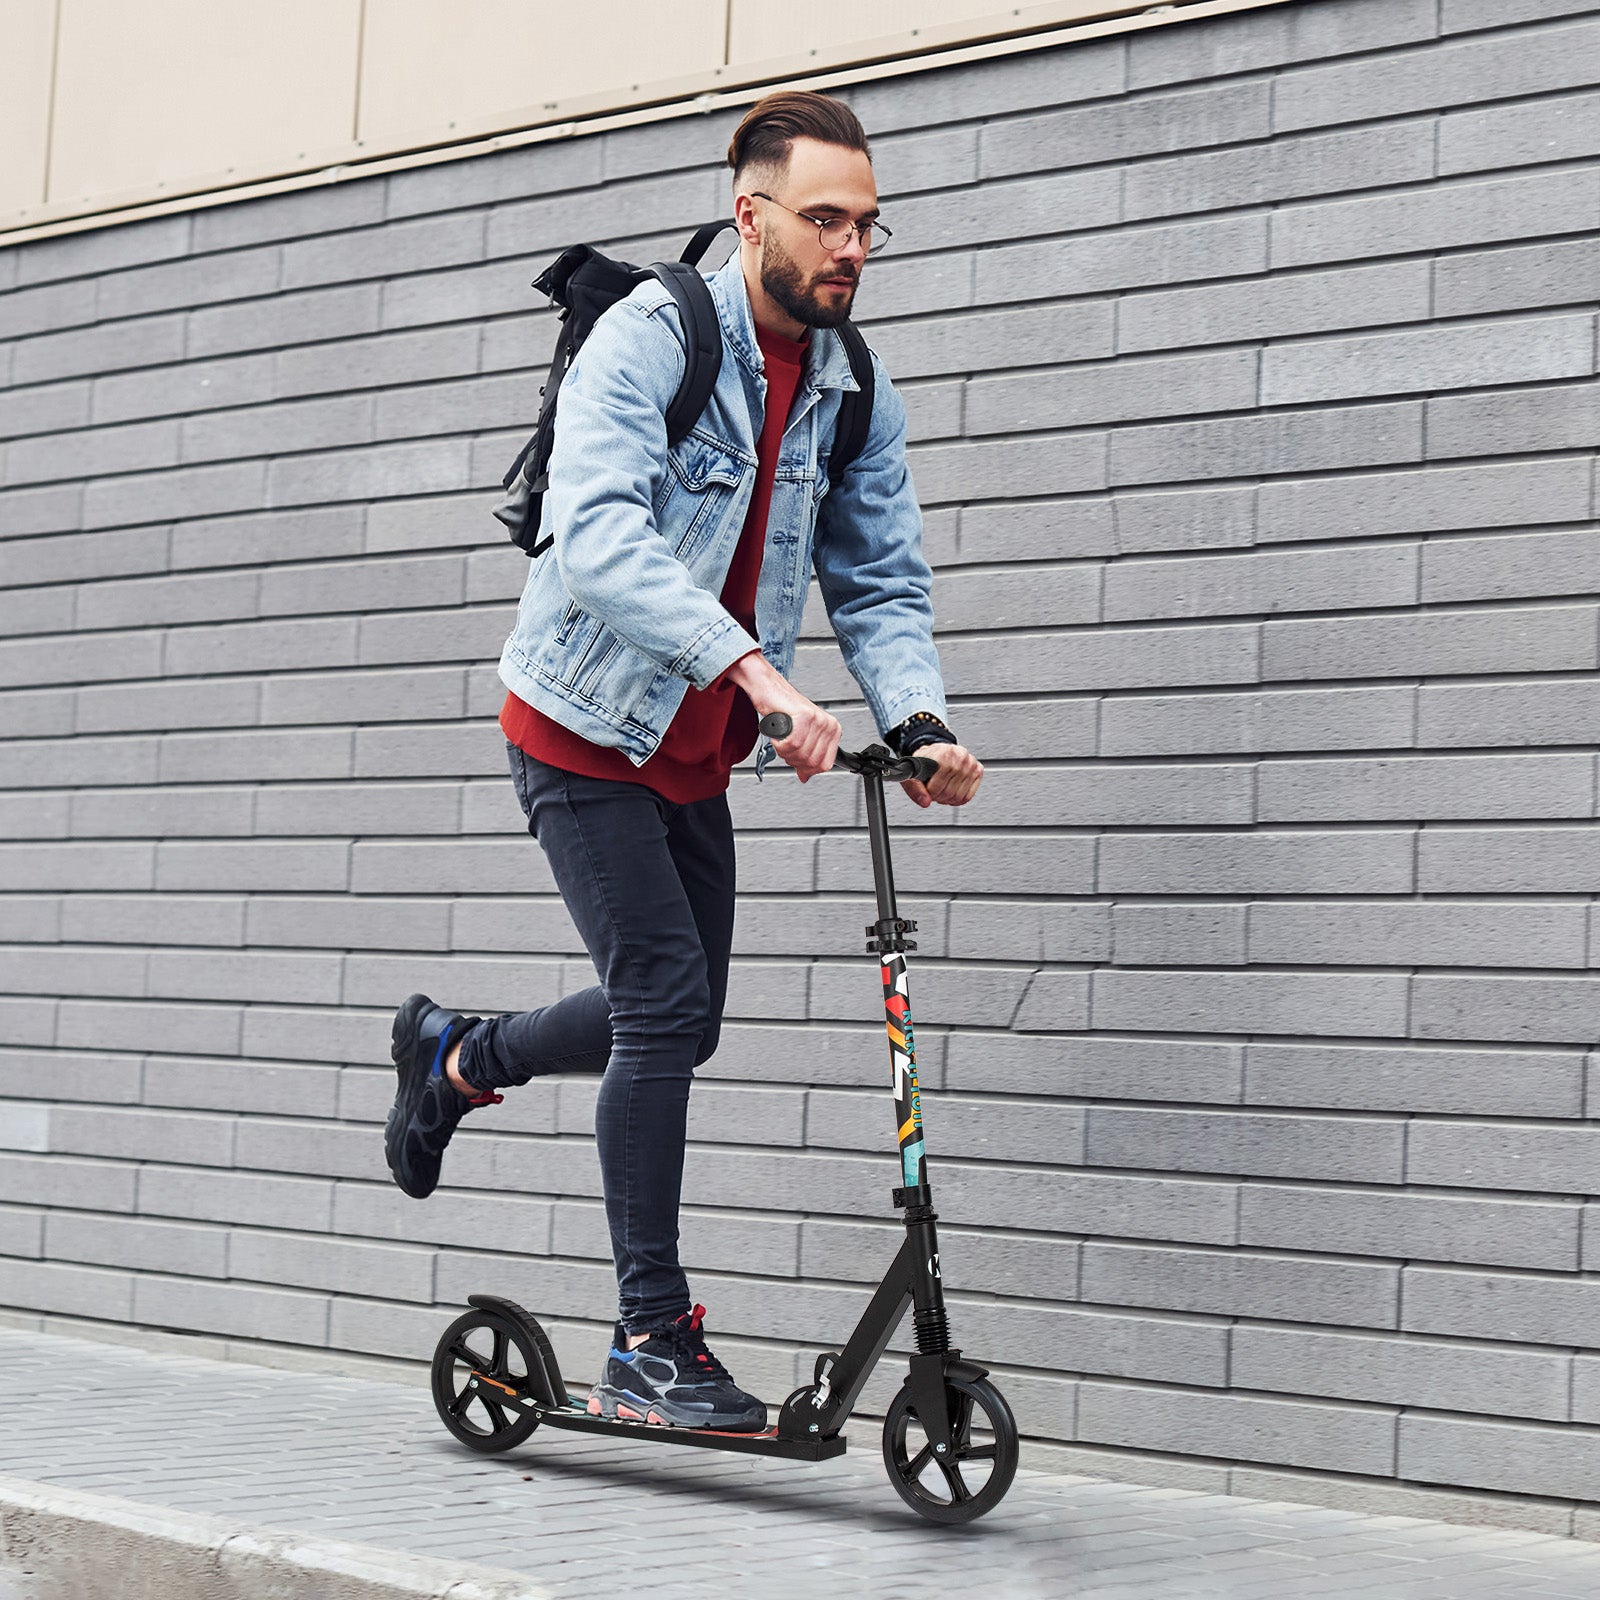 Foldable-Scooter-Scooter-Height-Adjustable-Foldable-City-Scooter-with-Kickstand-205mm-Wheels-Stable-Aluminum-Scooter-for-Adults-and-Teenagers-up-to-100kg